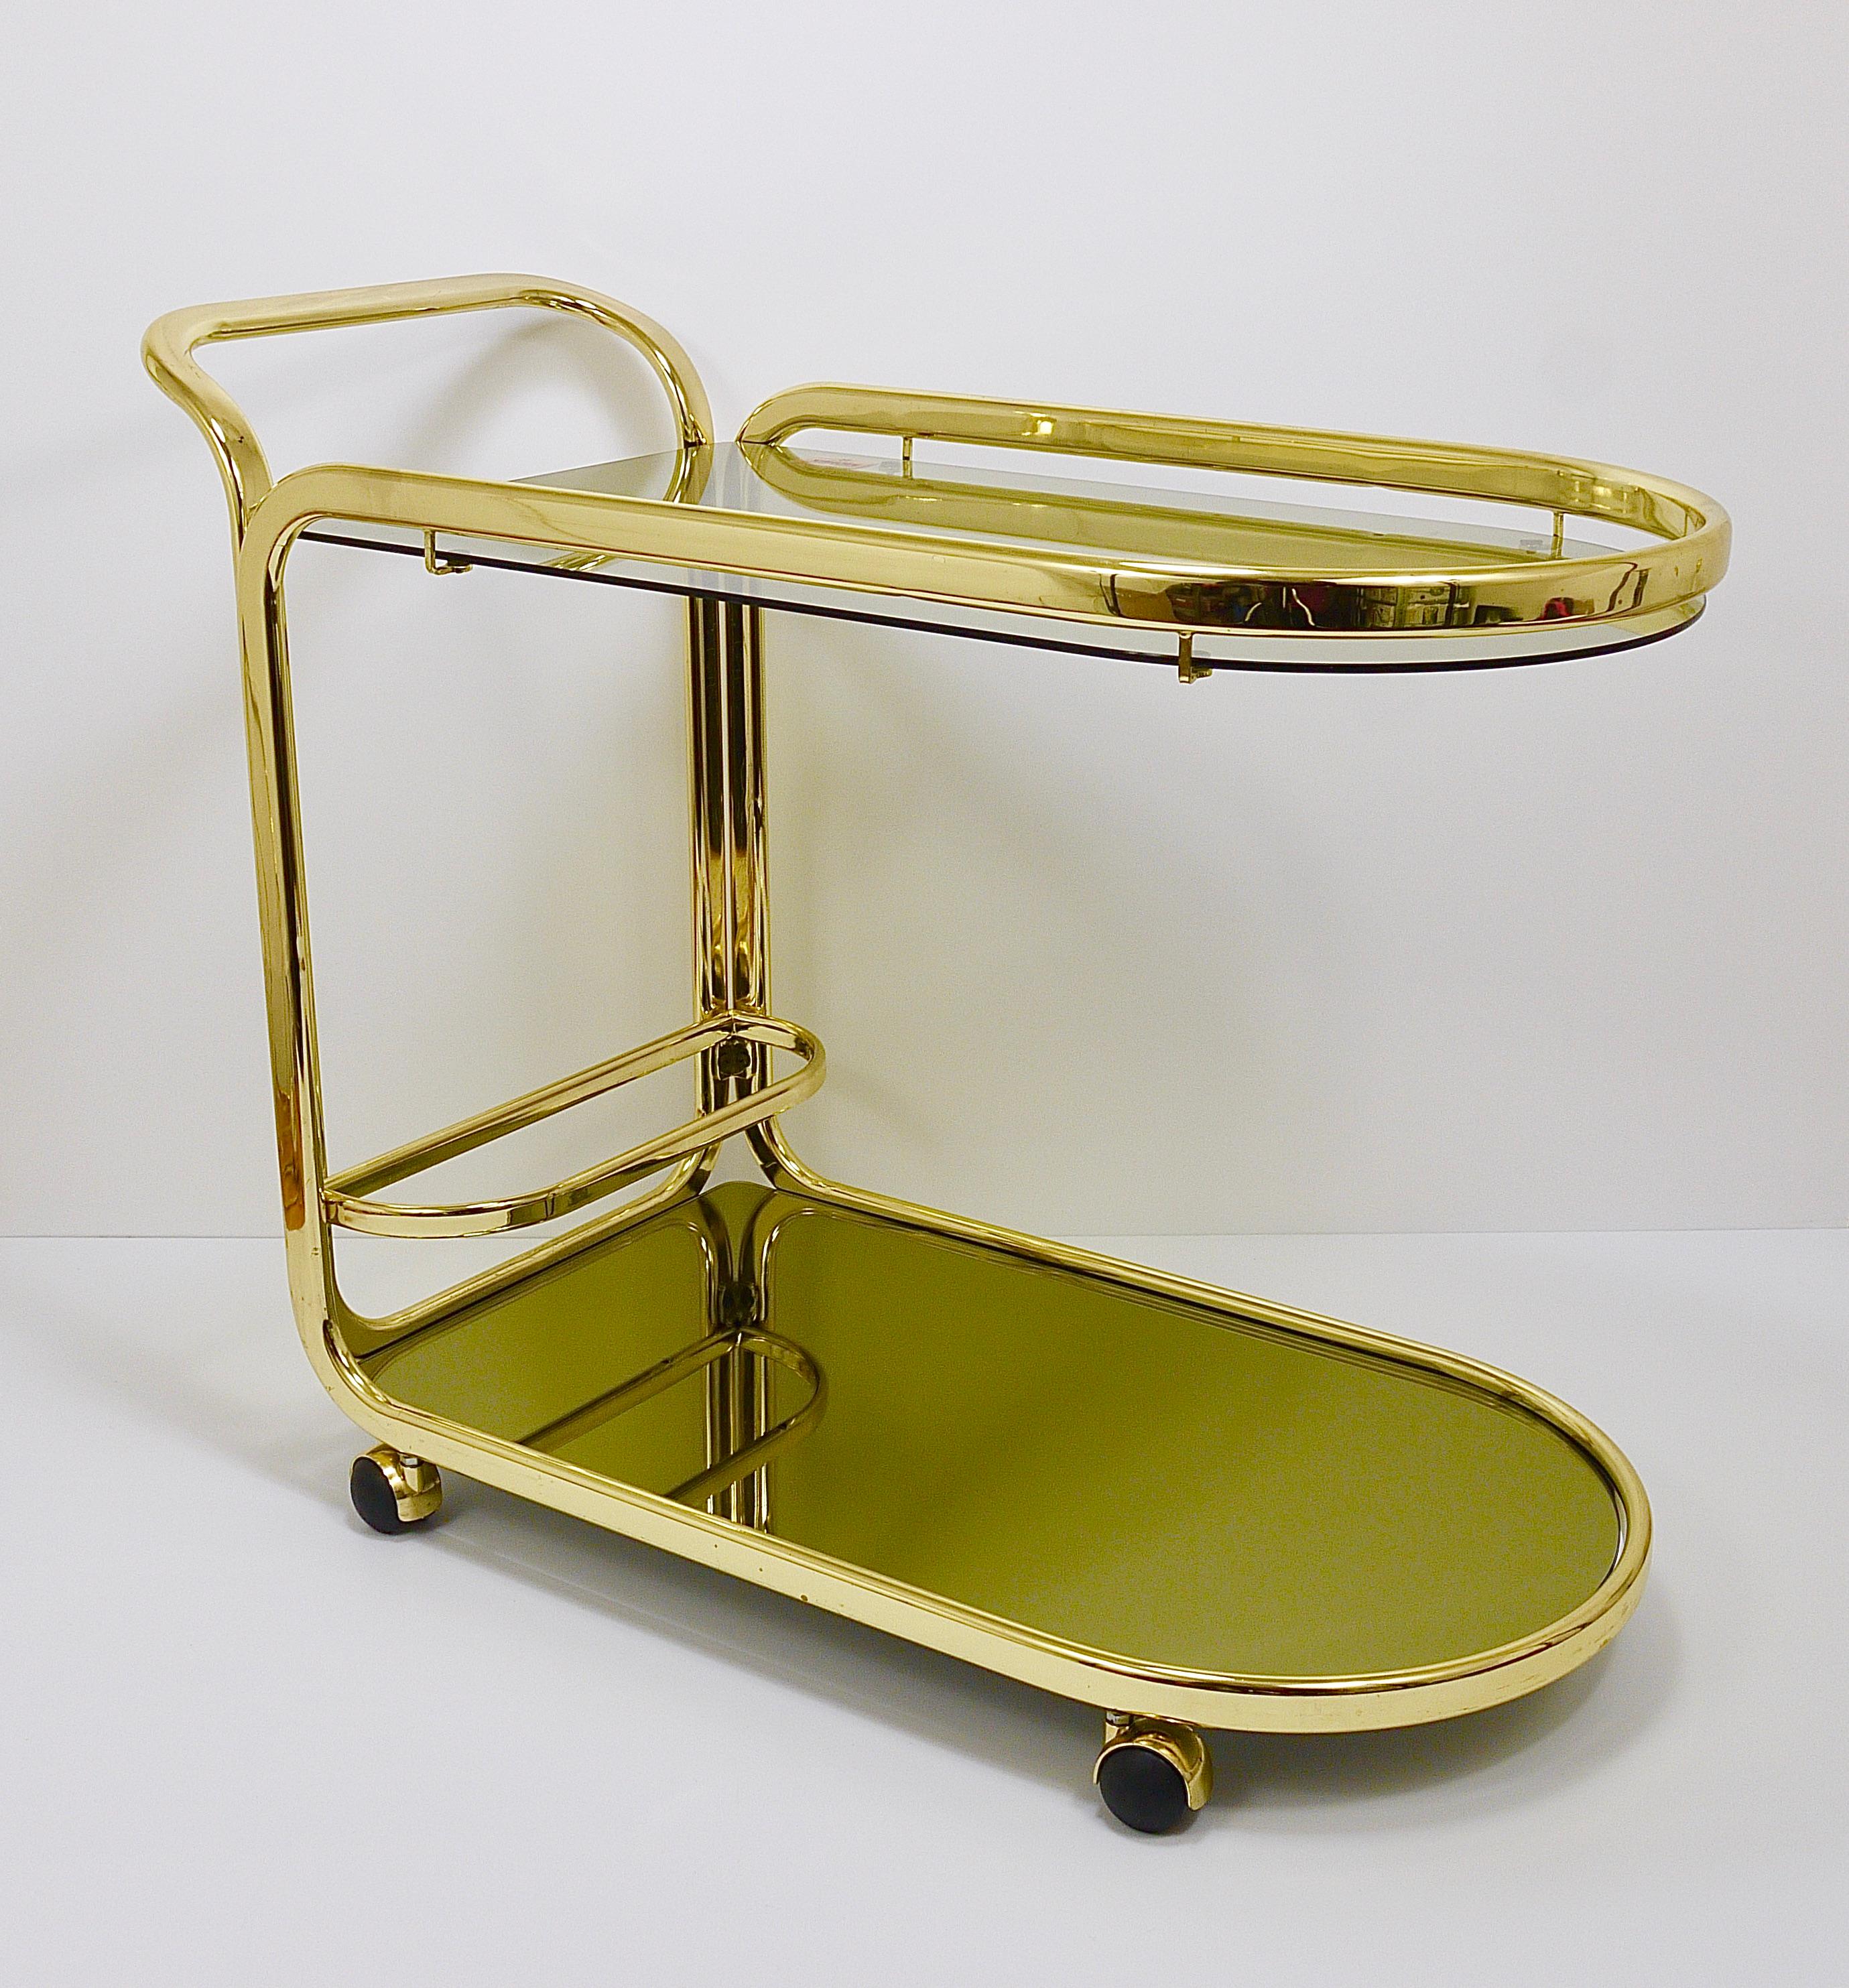 A wonderful Hollywood Regency two-tier bar cart/ drinks serving trolley on wheels from the 1970s. Designed and manufactured by Morex Italy. A beautiful Midcentury piece, made of gilded tubular metal with two levels, the upper one is made of grey